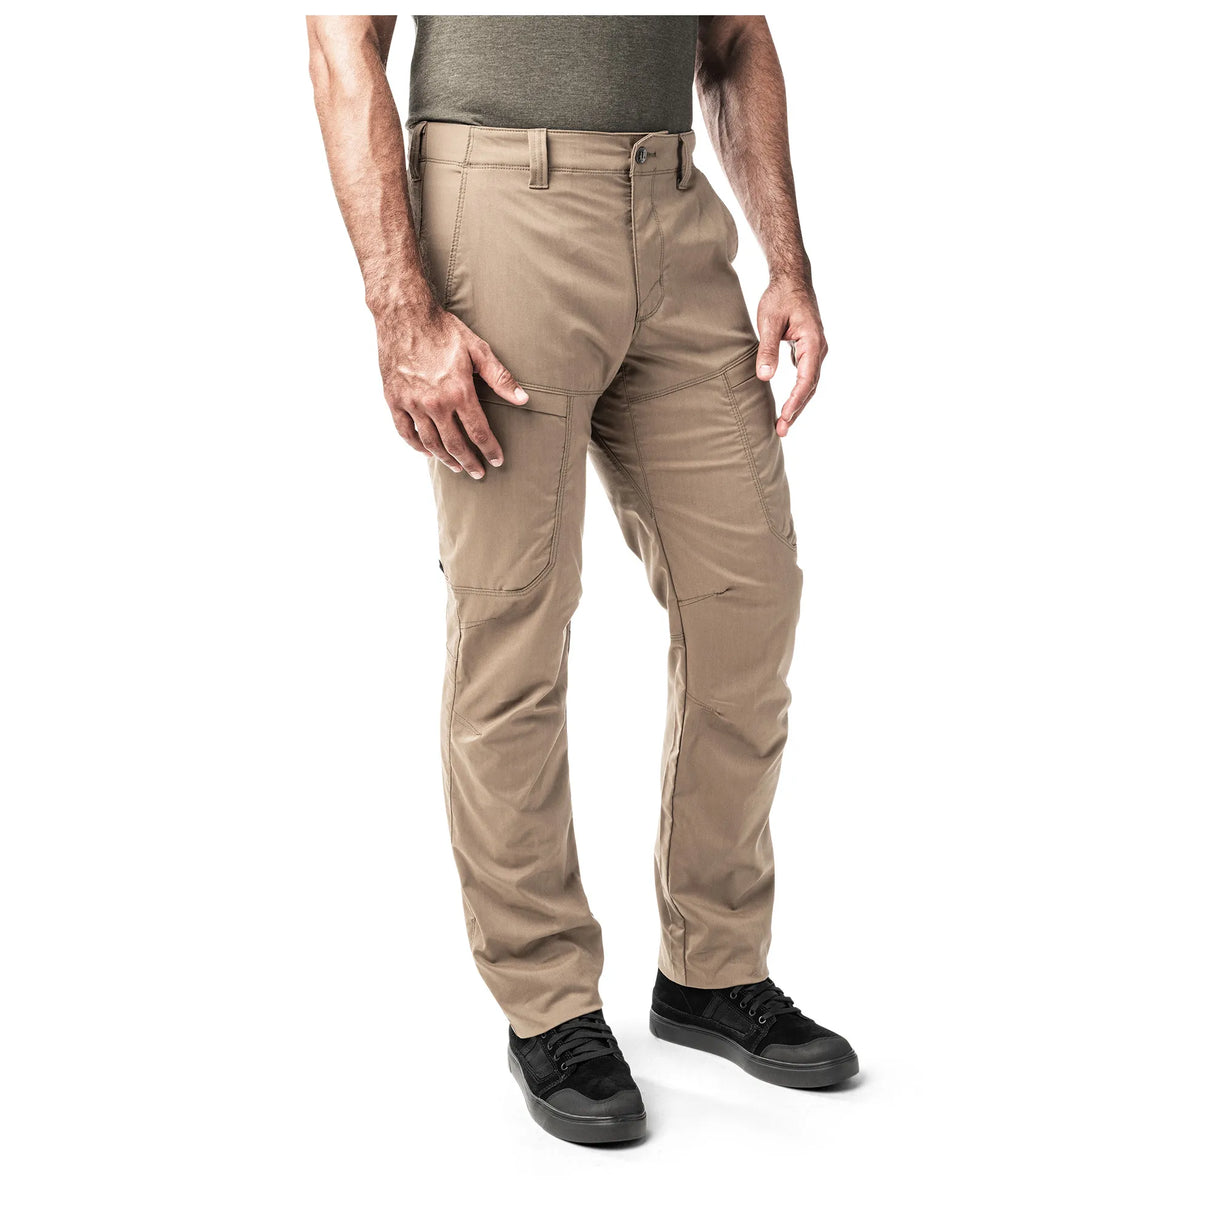 Straight Fit Pant: Provides a modern and comfortable fit for everyday wear.